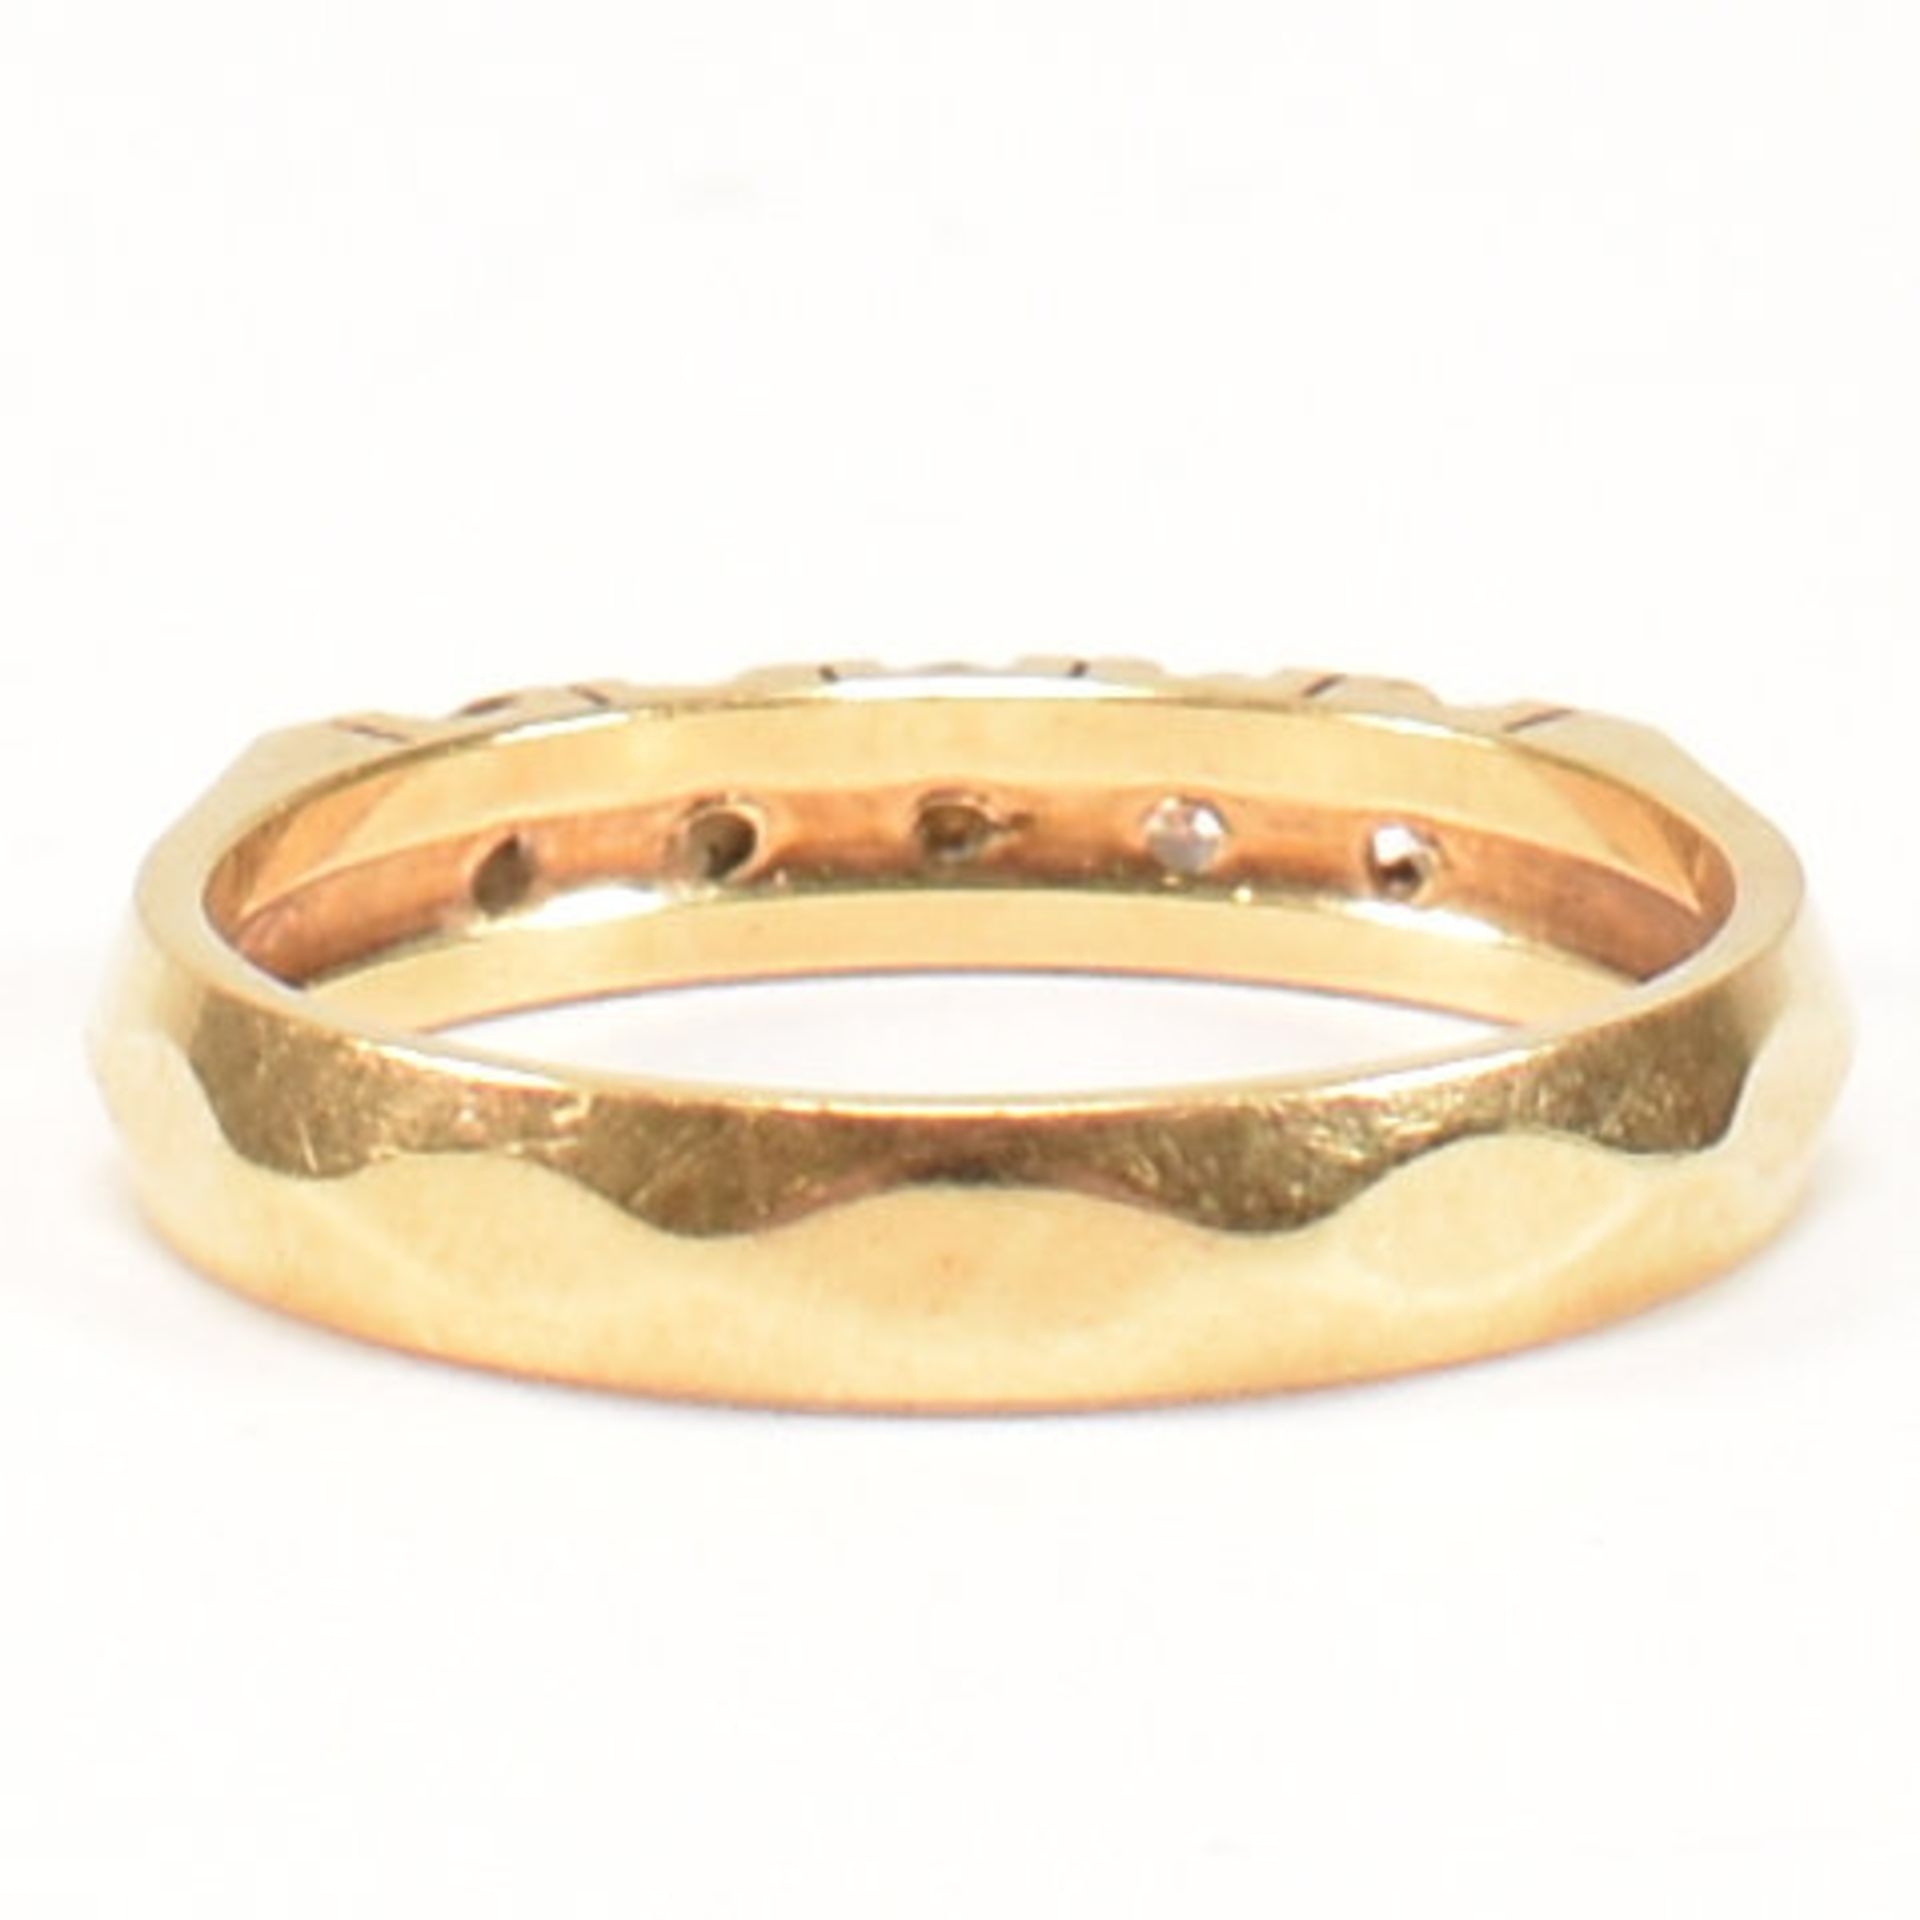 18CT GOLD & DIAMOND FIVE STONE RING - Image 6 of 9